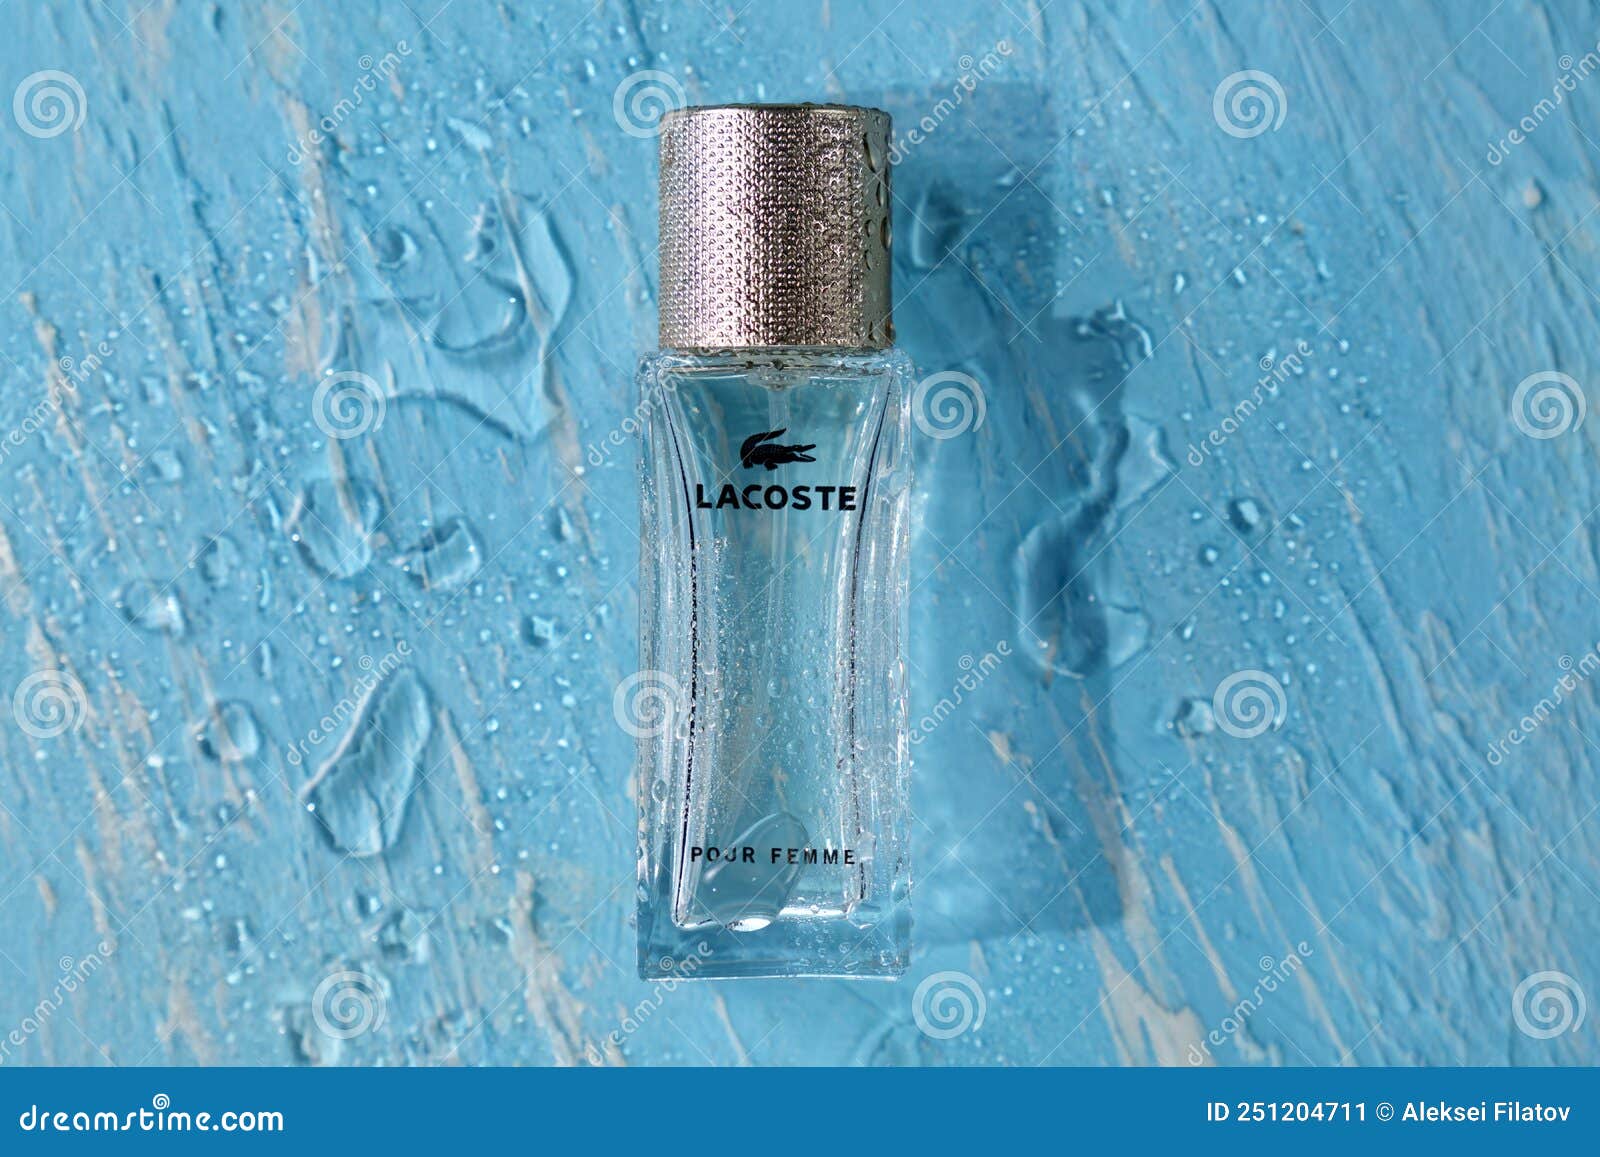 Tyumen, Russia-June 15, 2022: Lacoste Pour Femme is a Clothing Company. Selective Focus. Top View Editorial Photo - Image lacoste, famous: 251204711